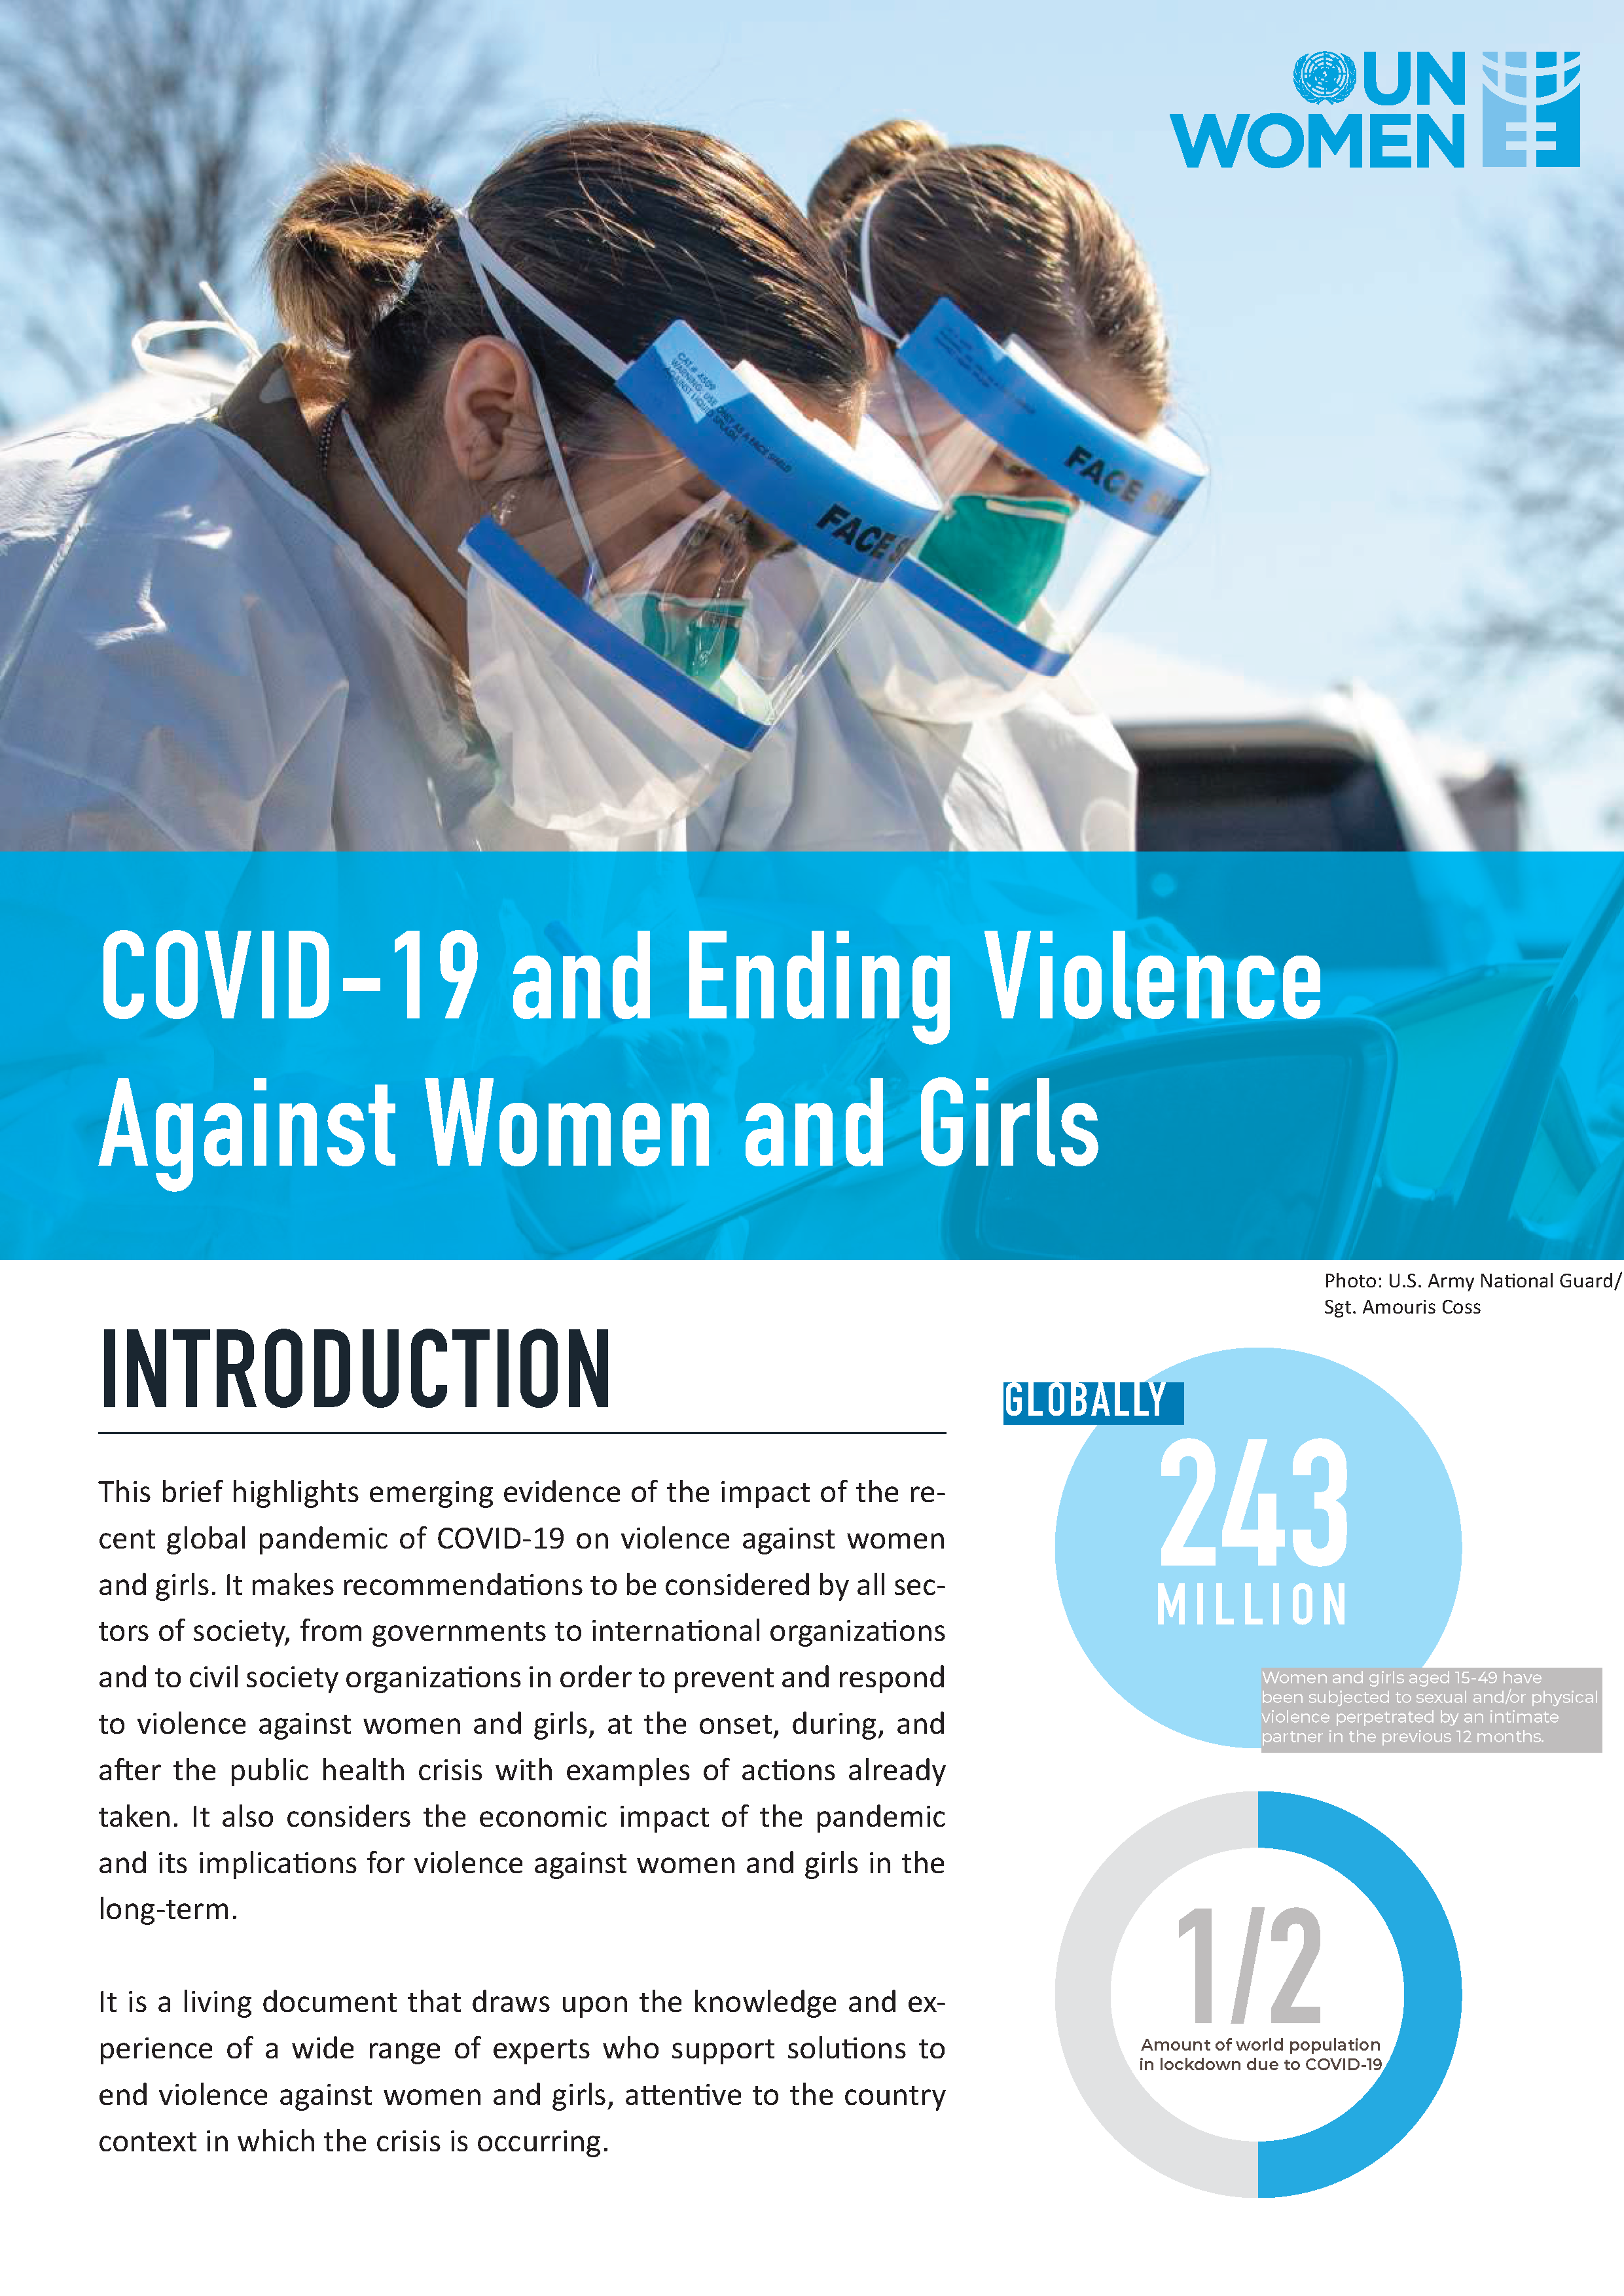 COVID-19 and VAW